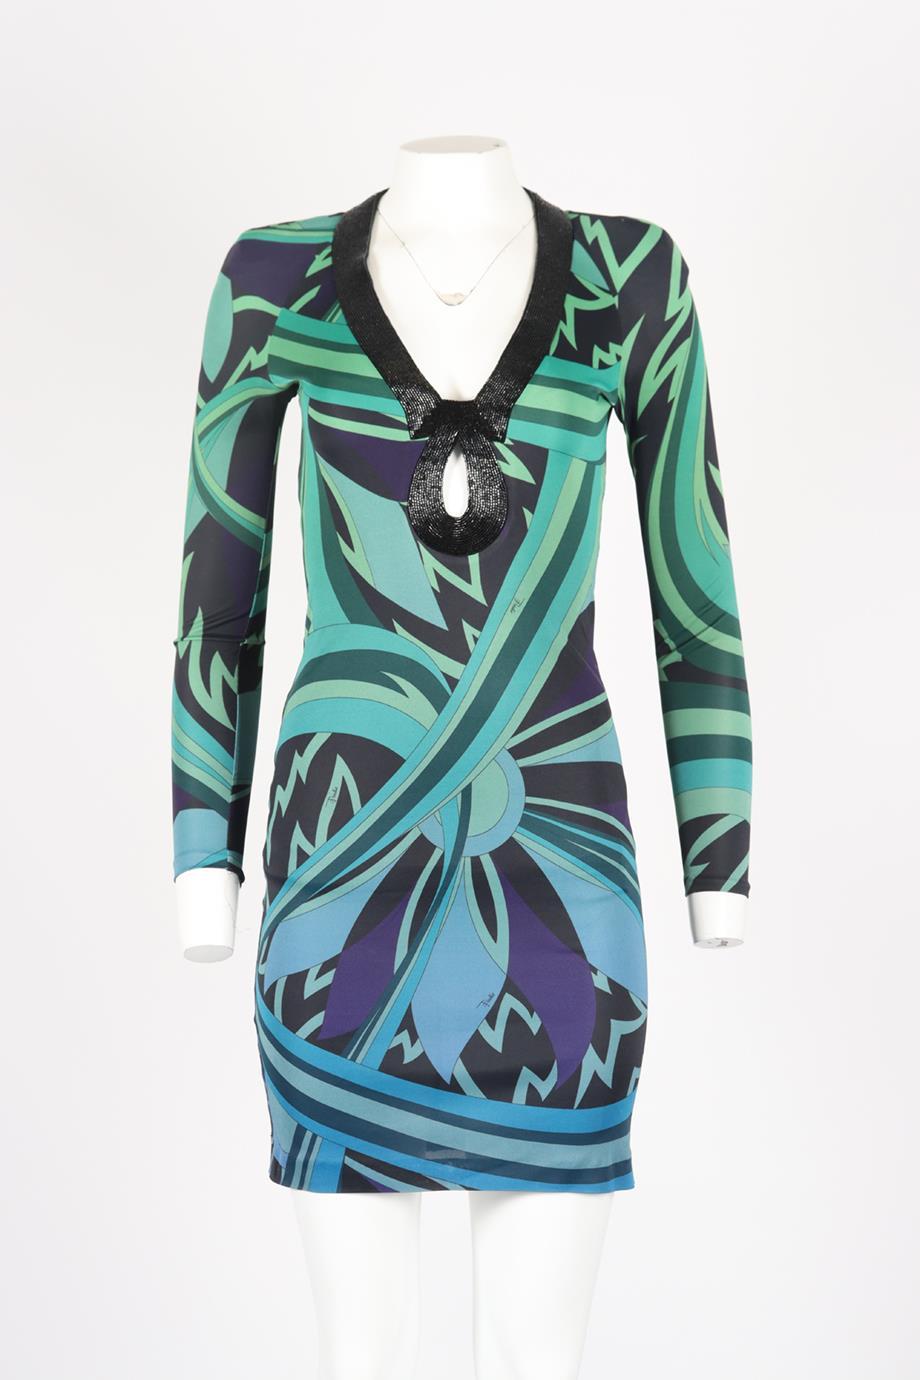 Emilio Pucci Embellished Printed Stretch Jersey Dress. Green, navy and black. Long Sleeve. V-Neck. Slips on. 100% Viscose. IT 38 (UK 6, US 2, FR 34). Bust: 27.8 in. Waist: 23 in. Hips: 24.5 in. Length: 28 in. Condition: Used. Good condition - Small